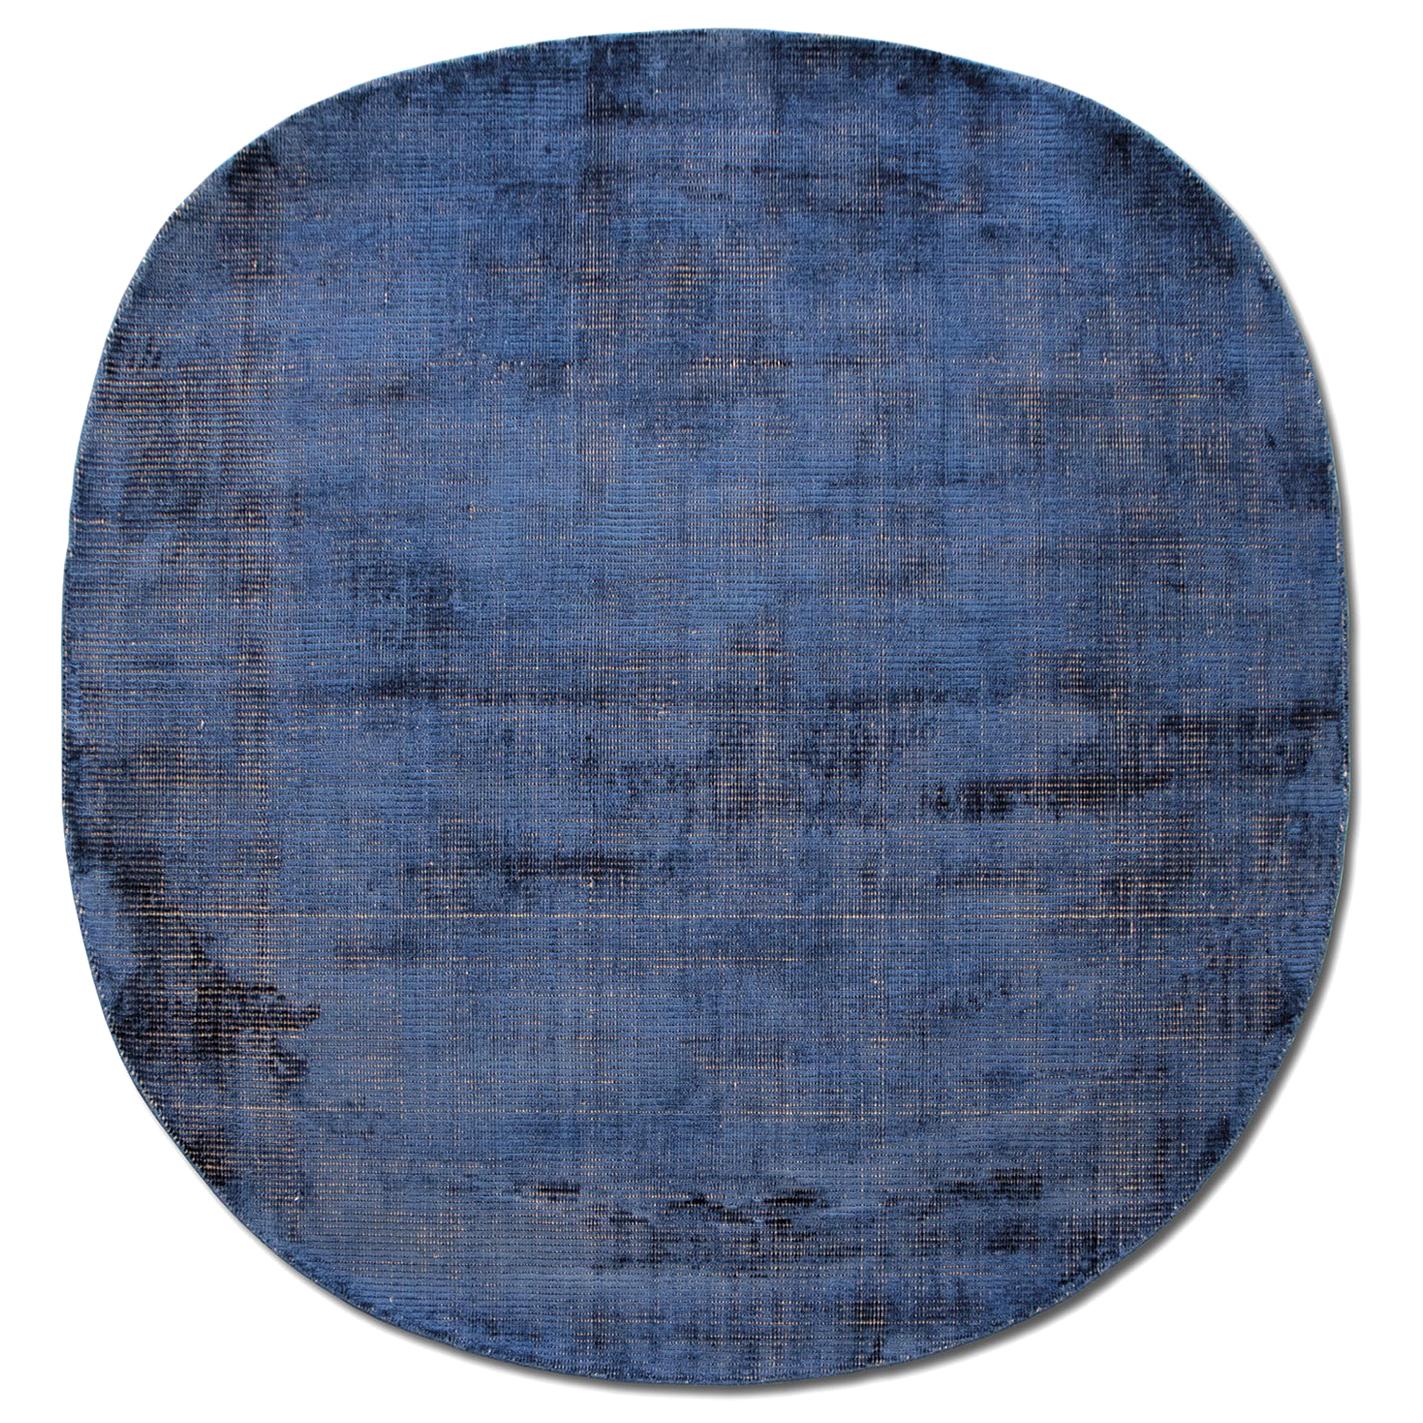 Contemporary Natural Shiny Blue Pure Silk Rug by Deanna Comelllini 180x190 cm im Angebot